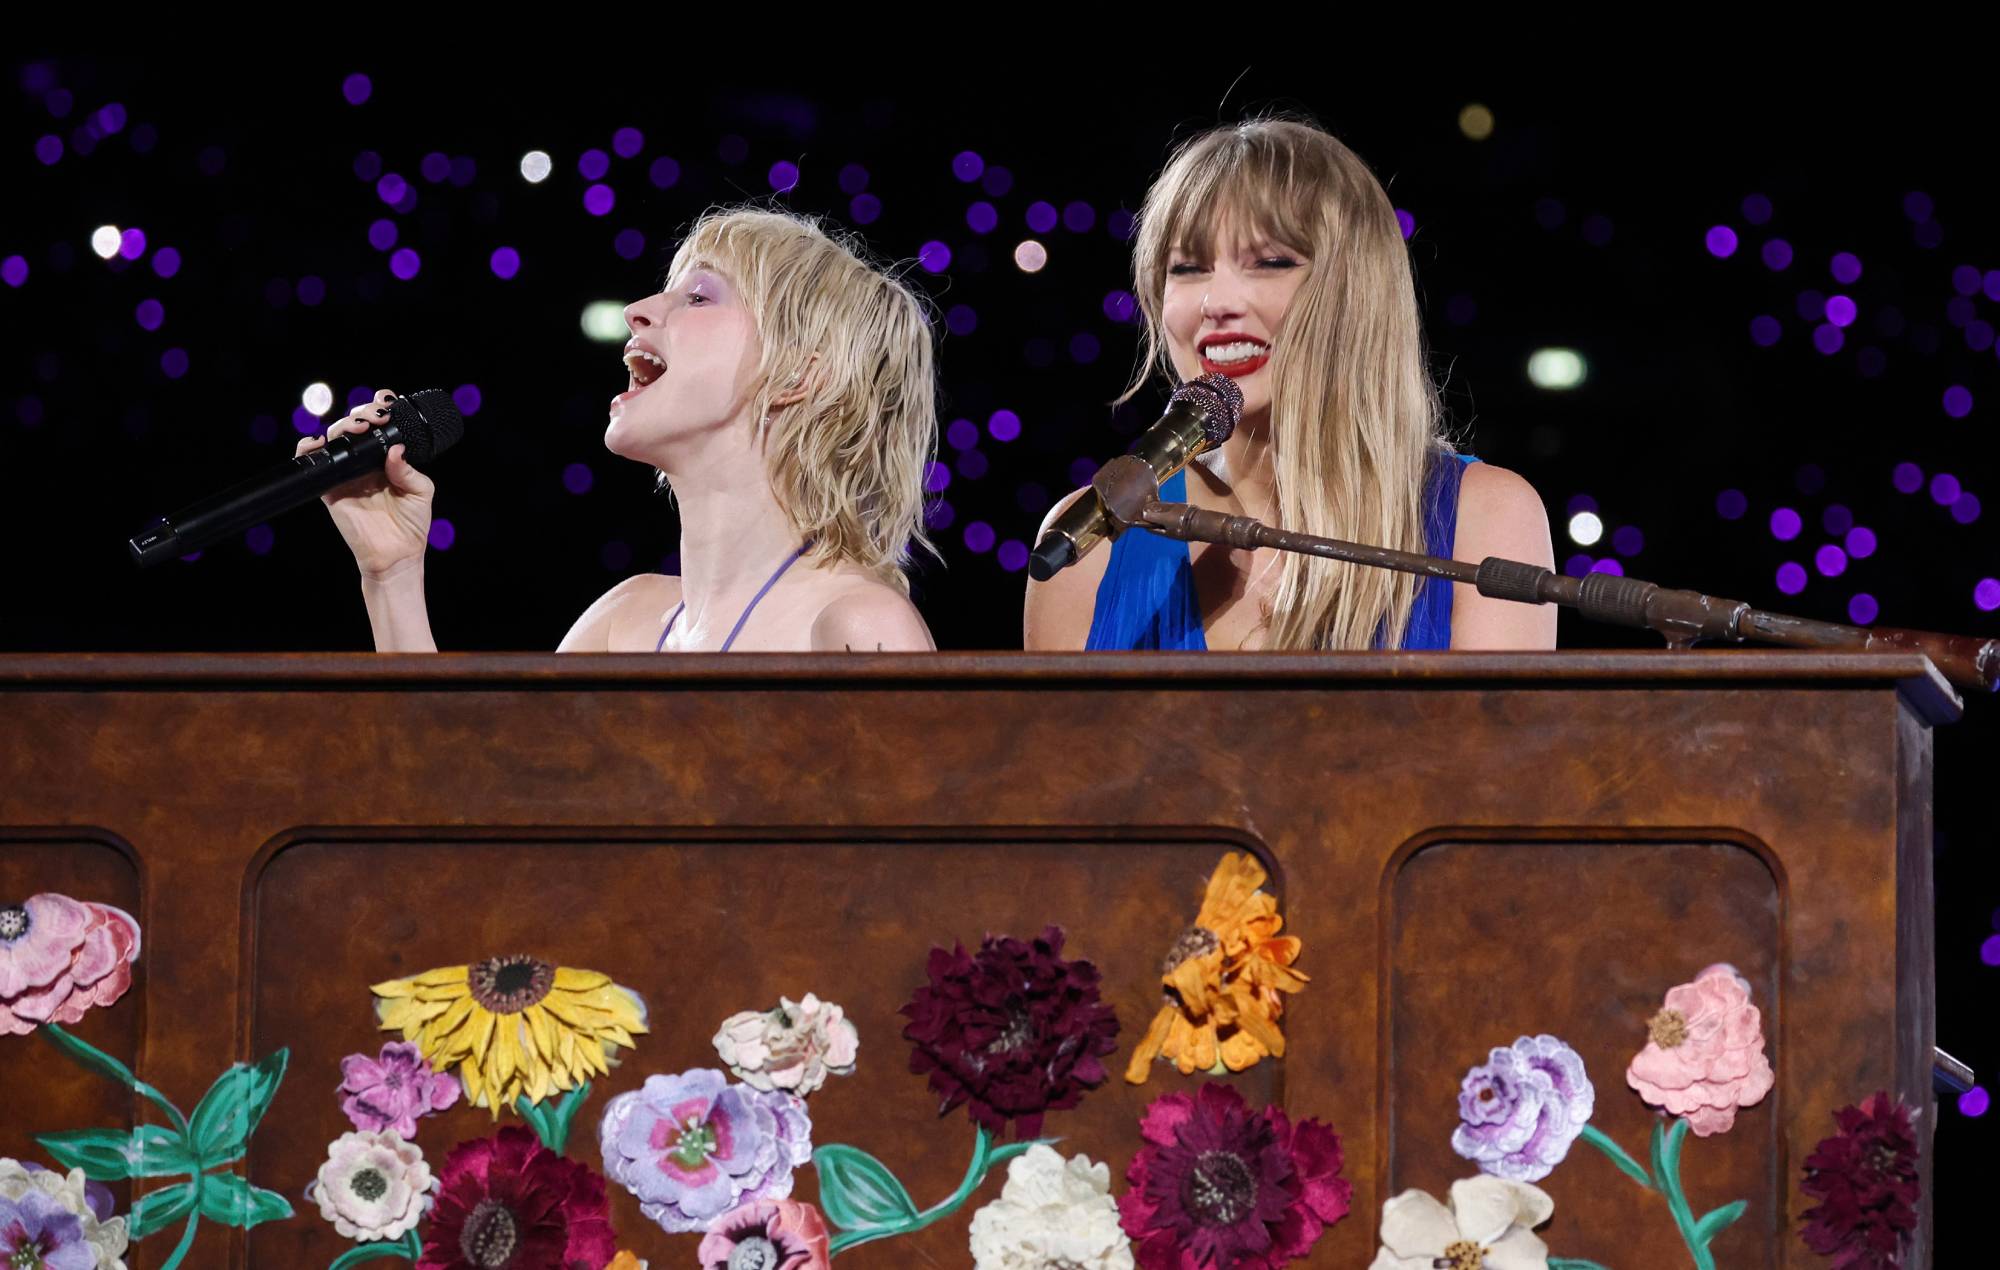 Watch Hayley Williams join Taylor Swift to perform ‘Castles Crumbling’ in London